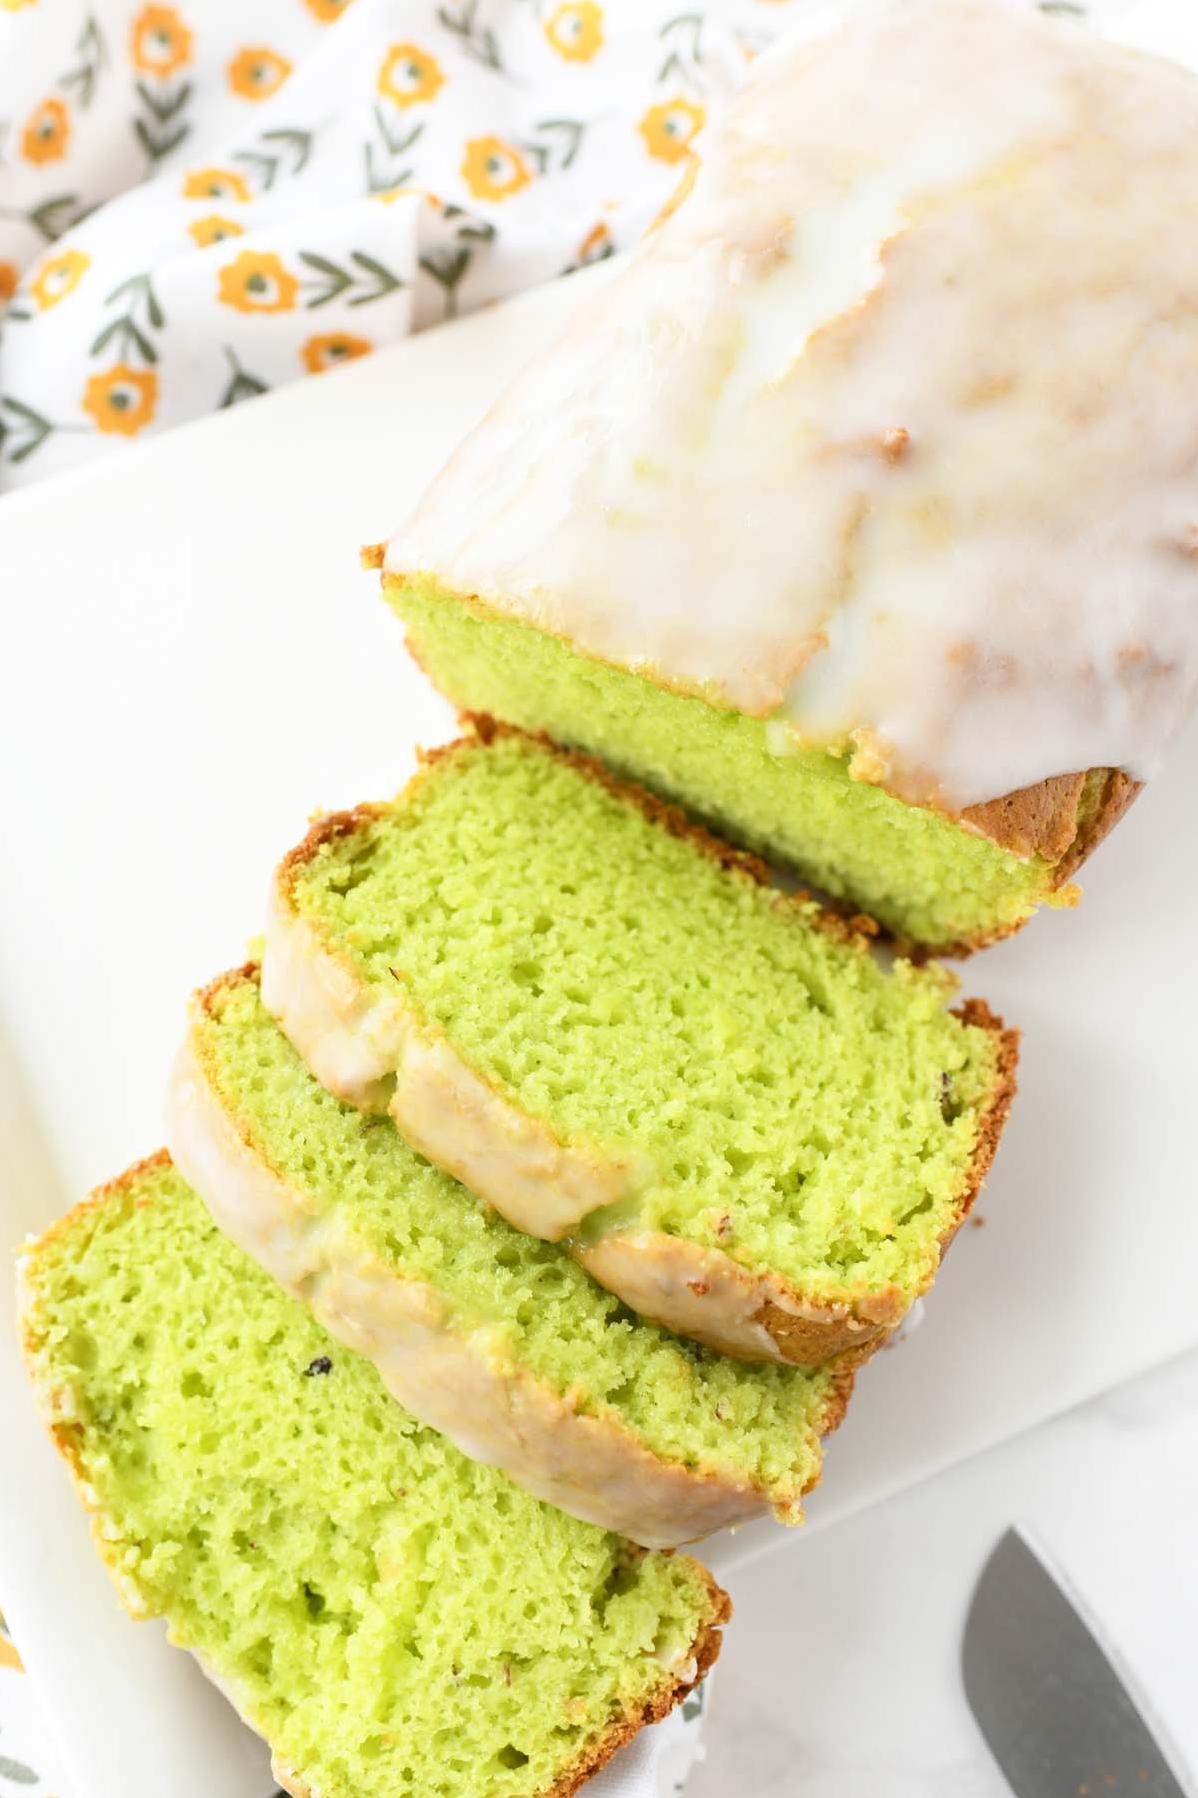  Baked to perfection with a crunchy pistachio topping.